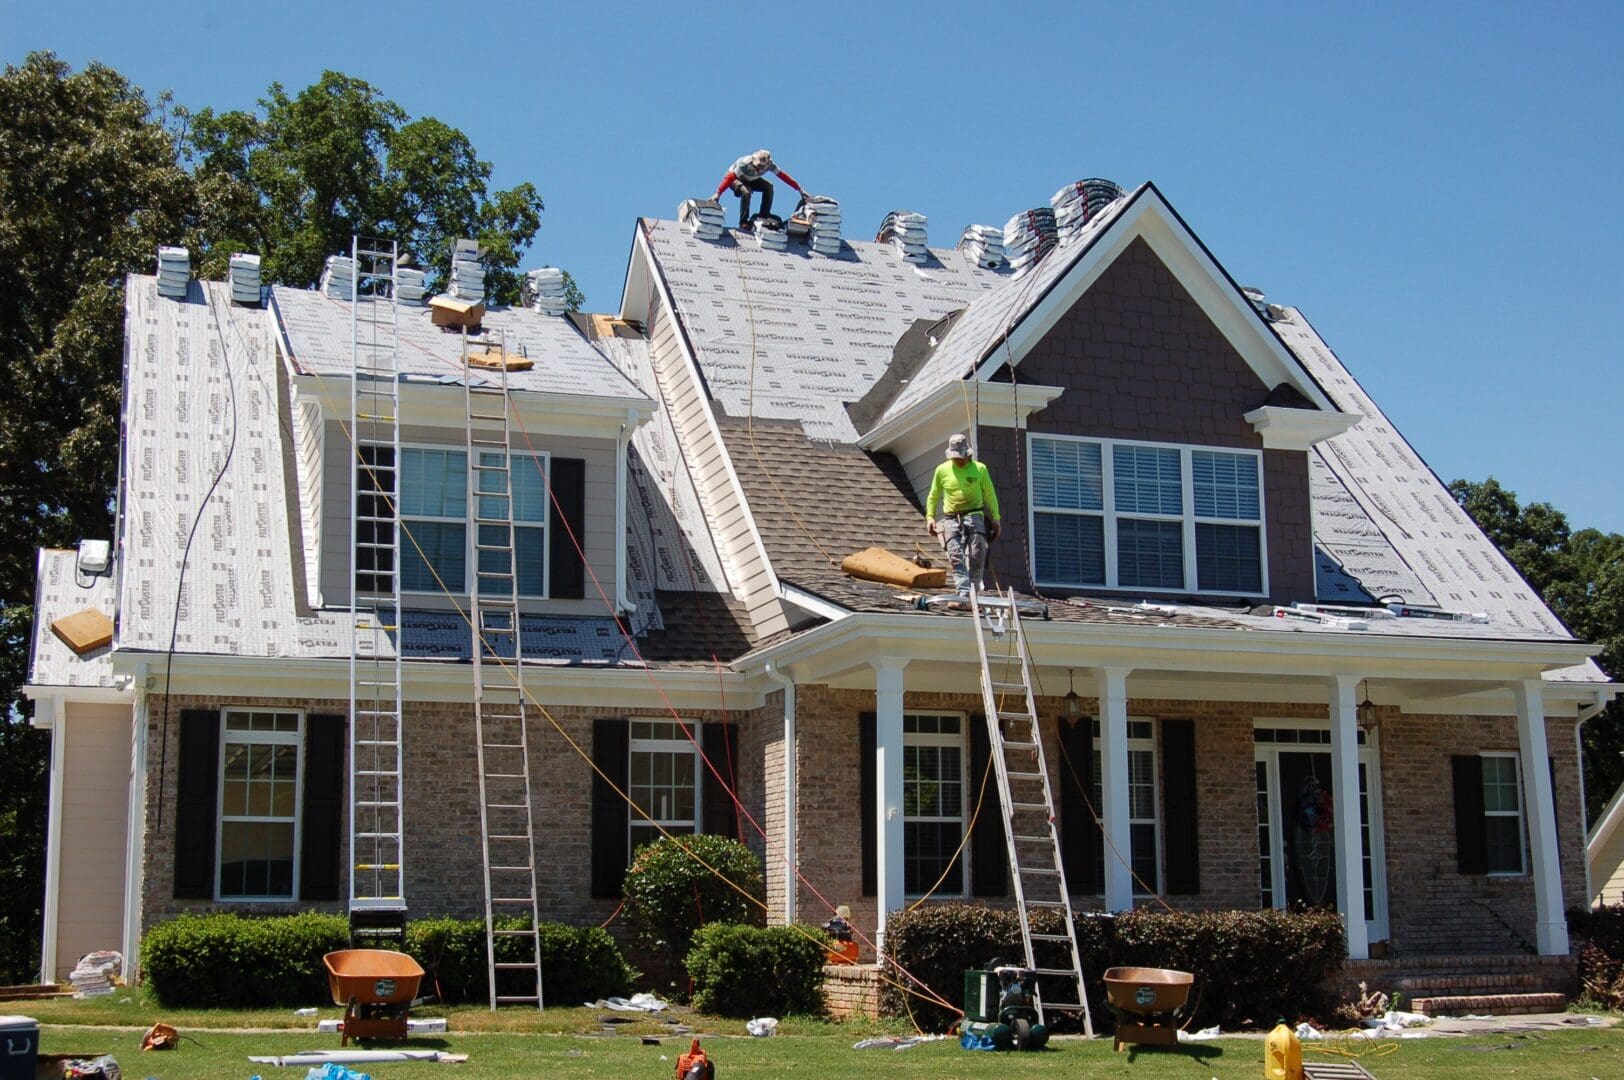 A roofing crew working on a roofing construction project